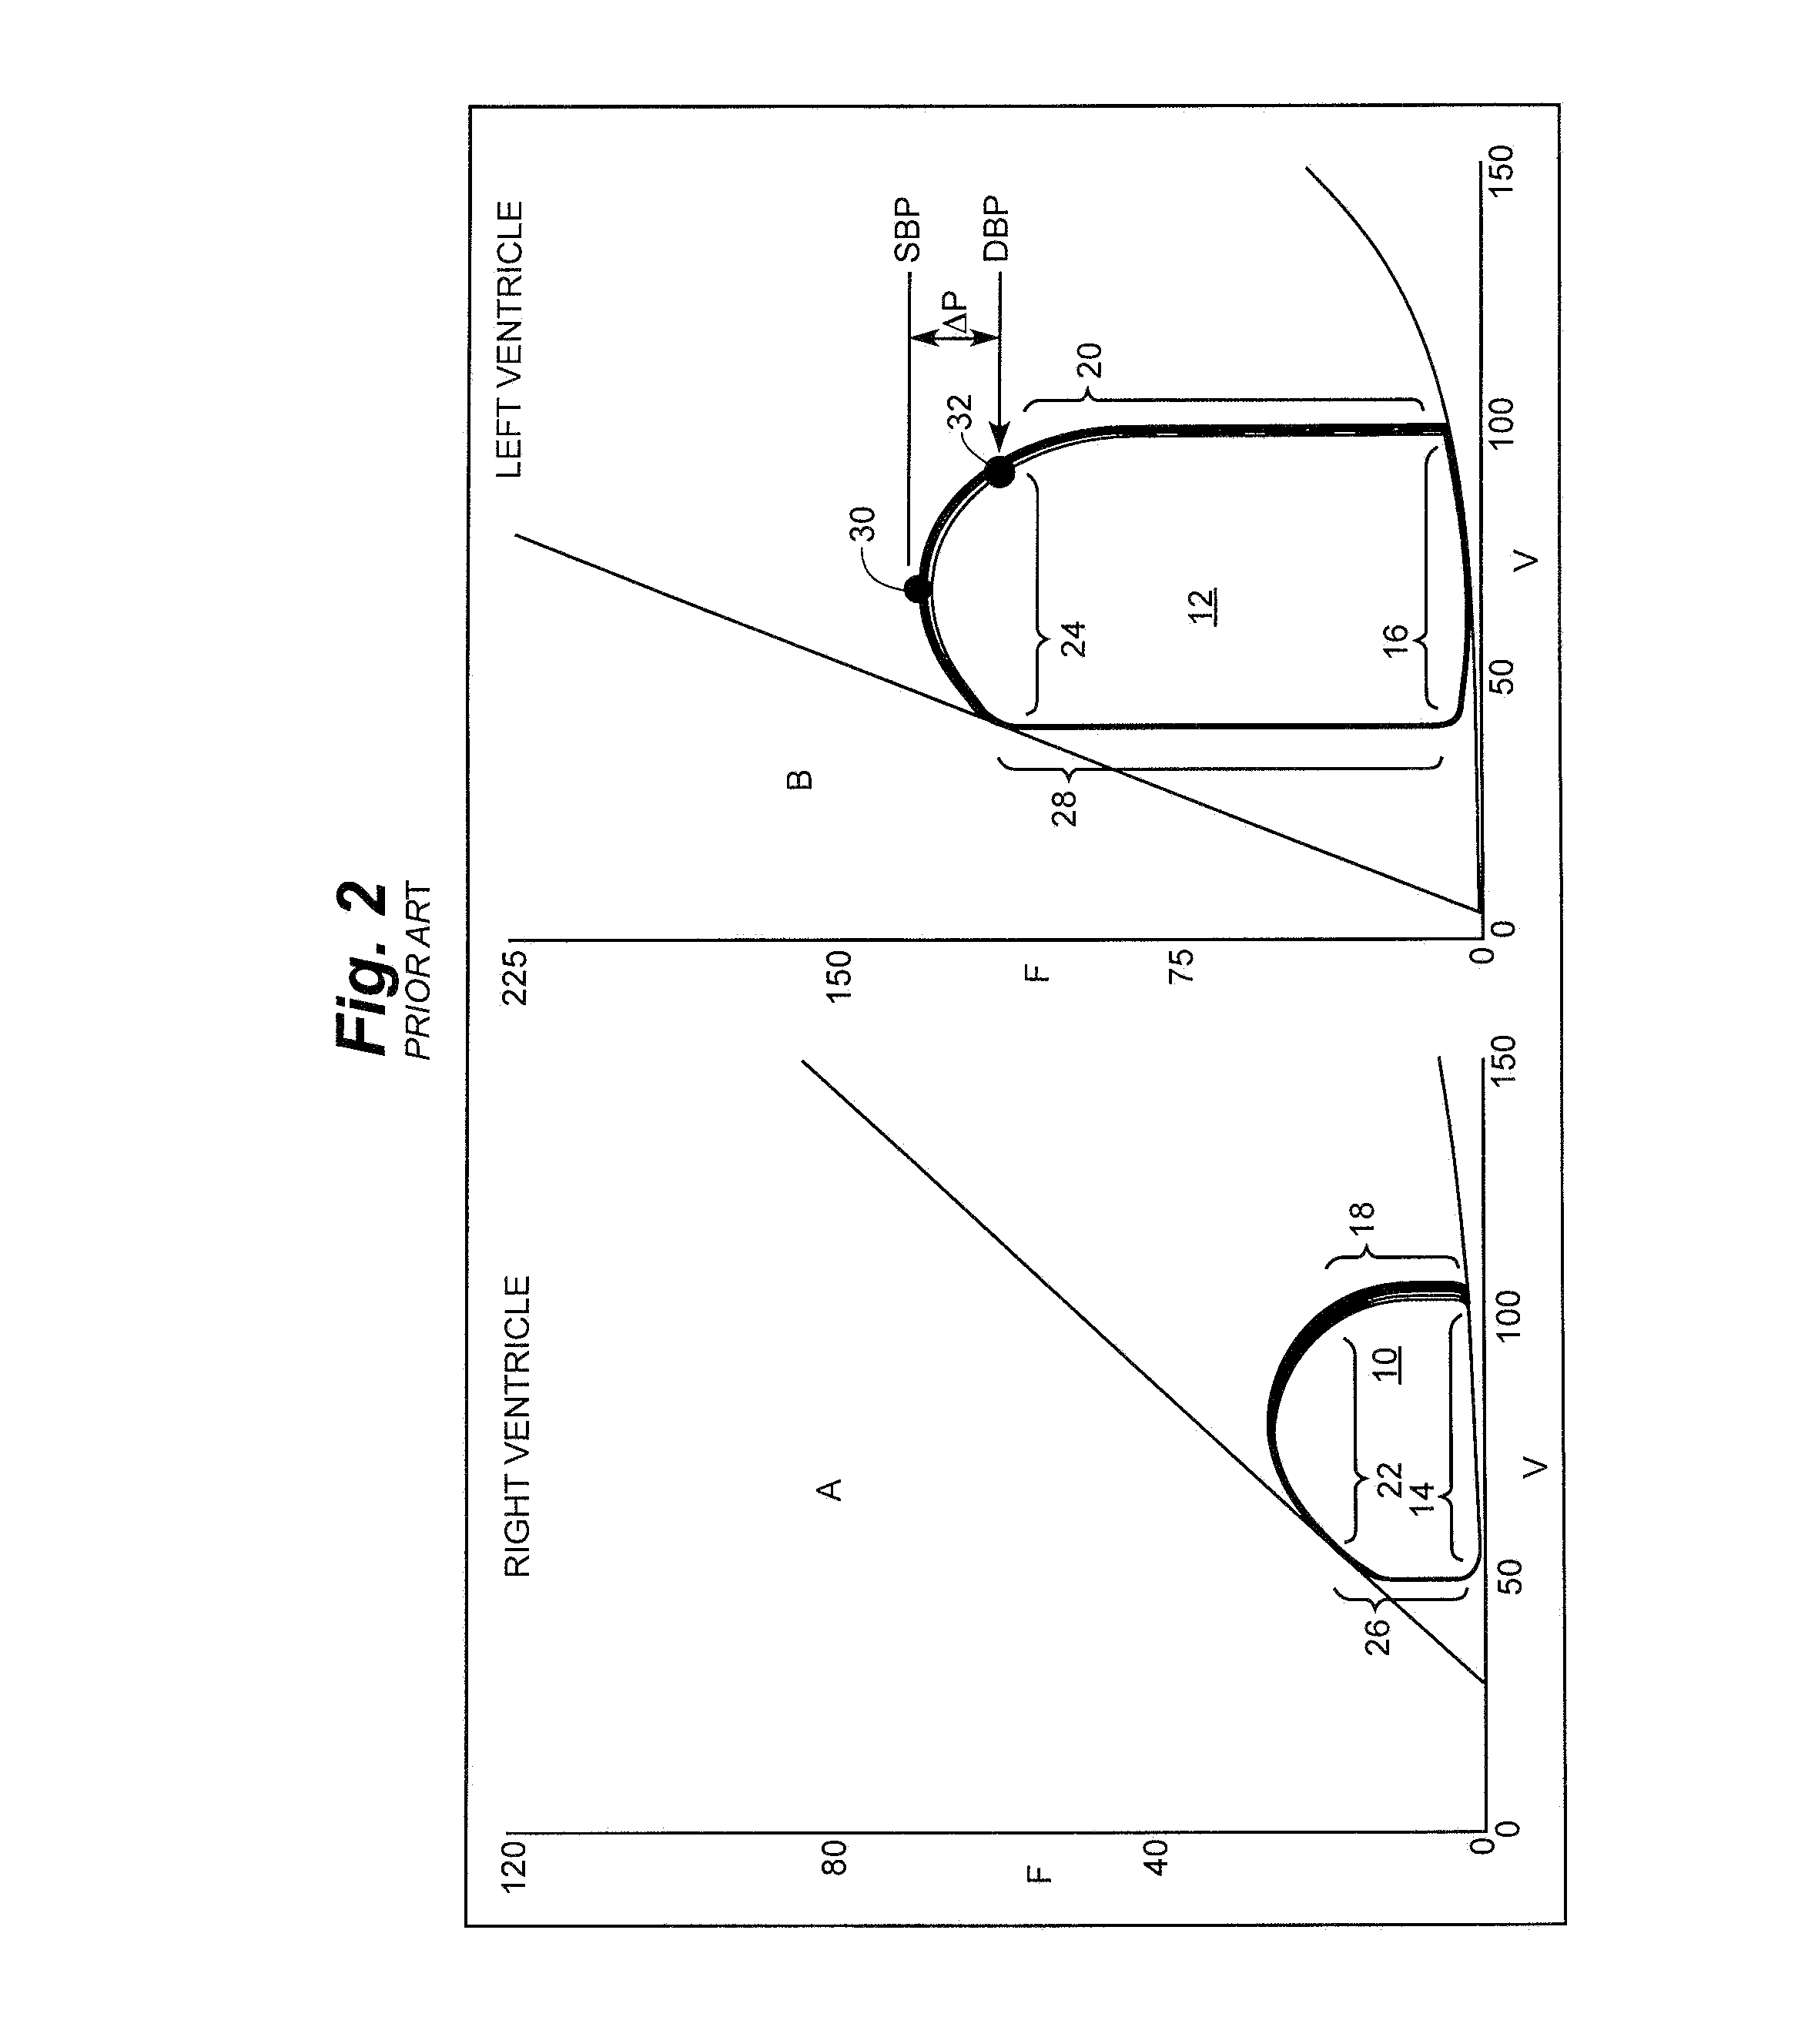 Cardiac Stimulation Apparatus And Method For The Control Of Hypertension